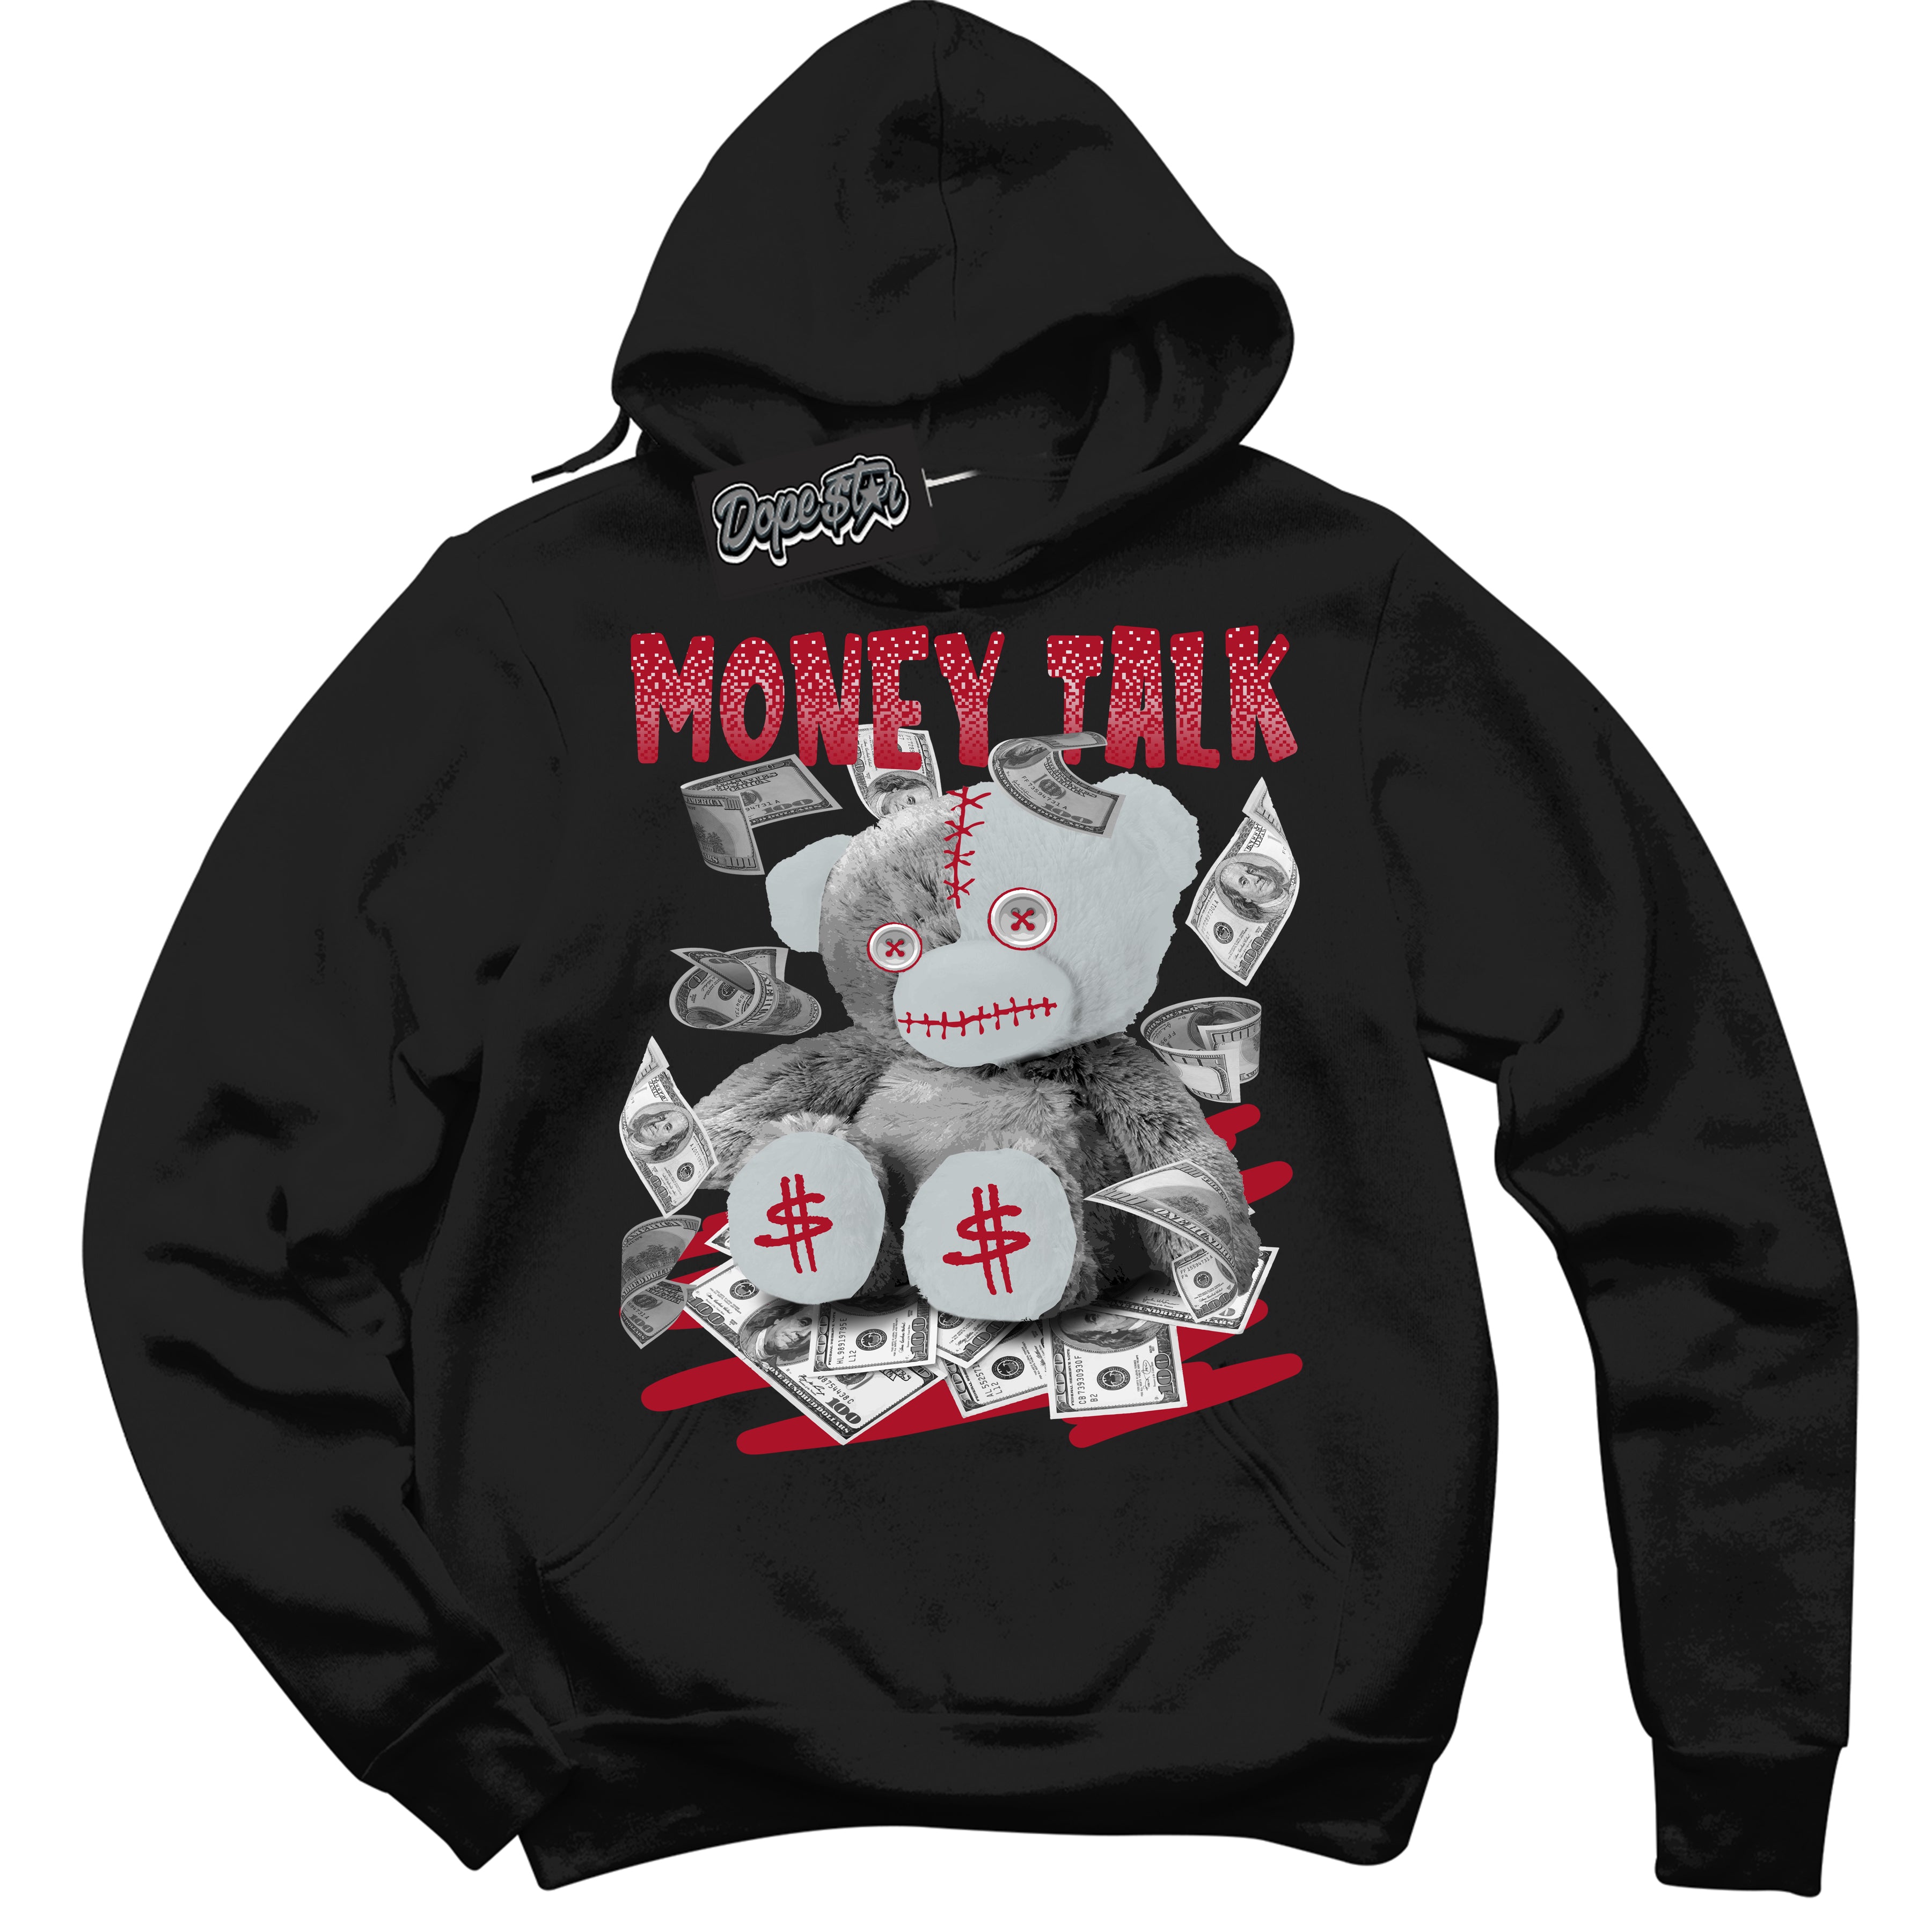 Cool Black Hoodie with “ Money Talk Bear ”  design that Perfectly Matches  Reverse Ultraman Sneakers.